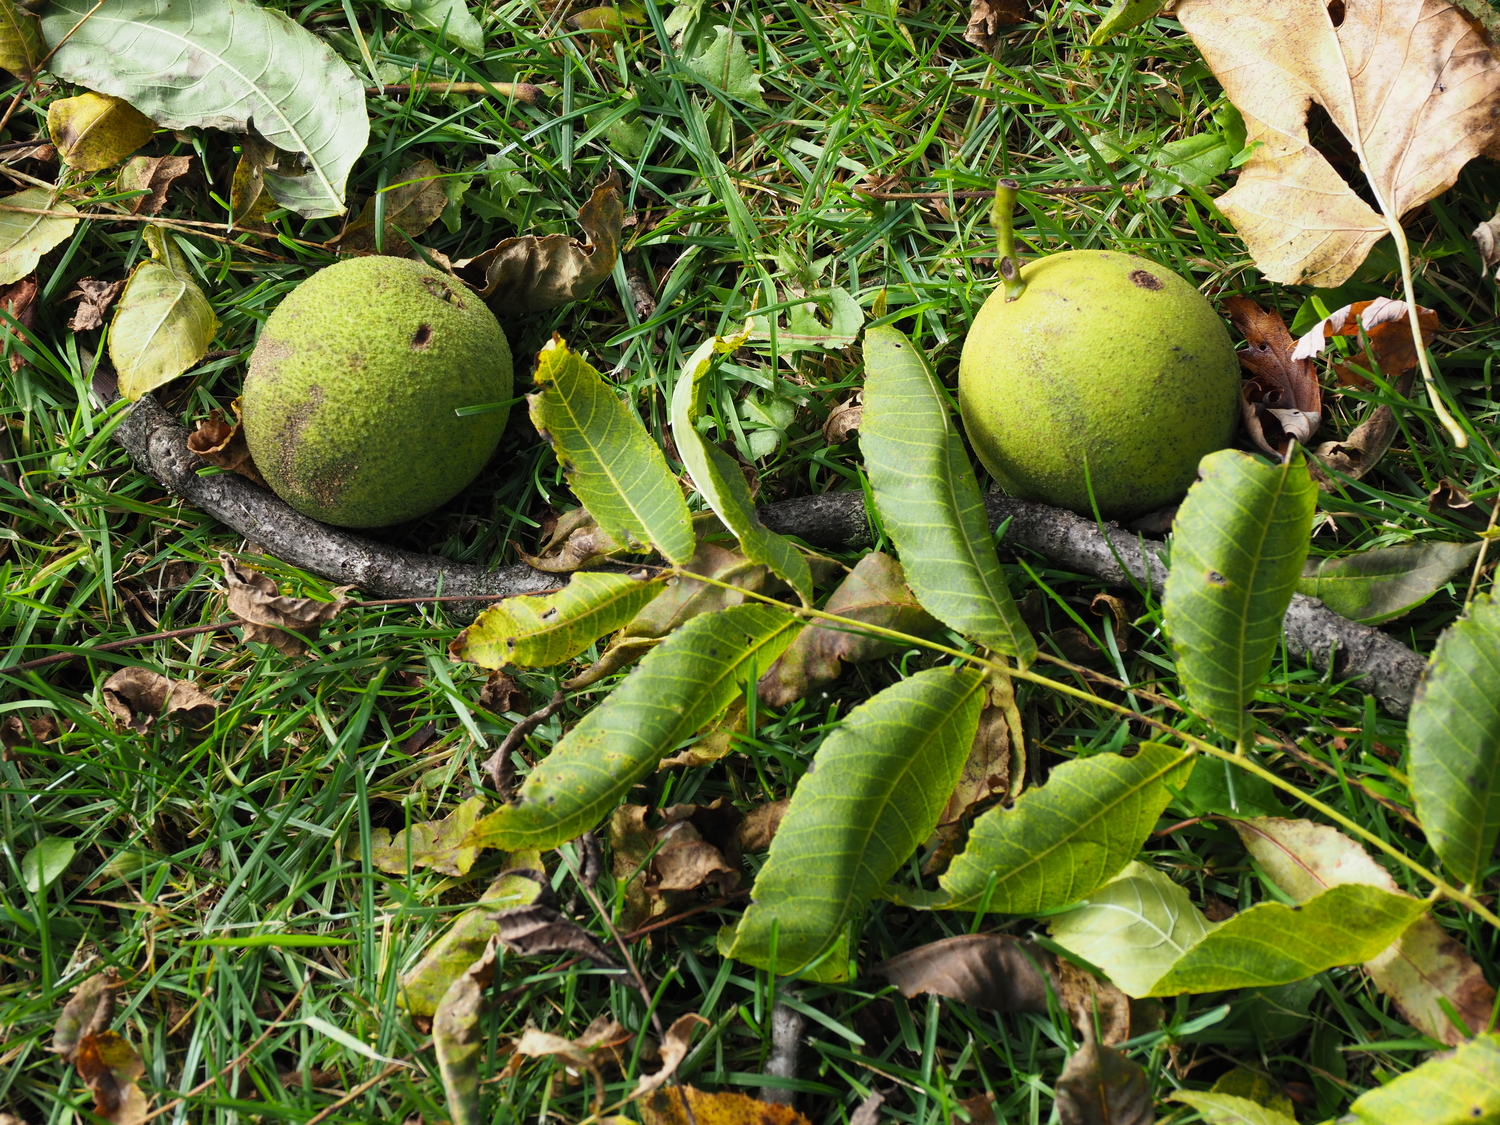 Under an old and very tall black walnut tree you can find dozens and dozens of fallen husked walnuts. About the size of a tennis ball, the nuts inside are an important source of late-winter food for many local squirrels who secret them under outdoor stairs, in garages, tool sheds and in the ground. ANDREW MESSINGER